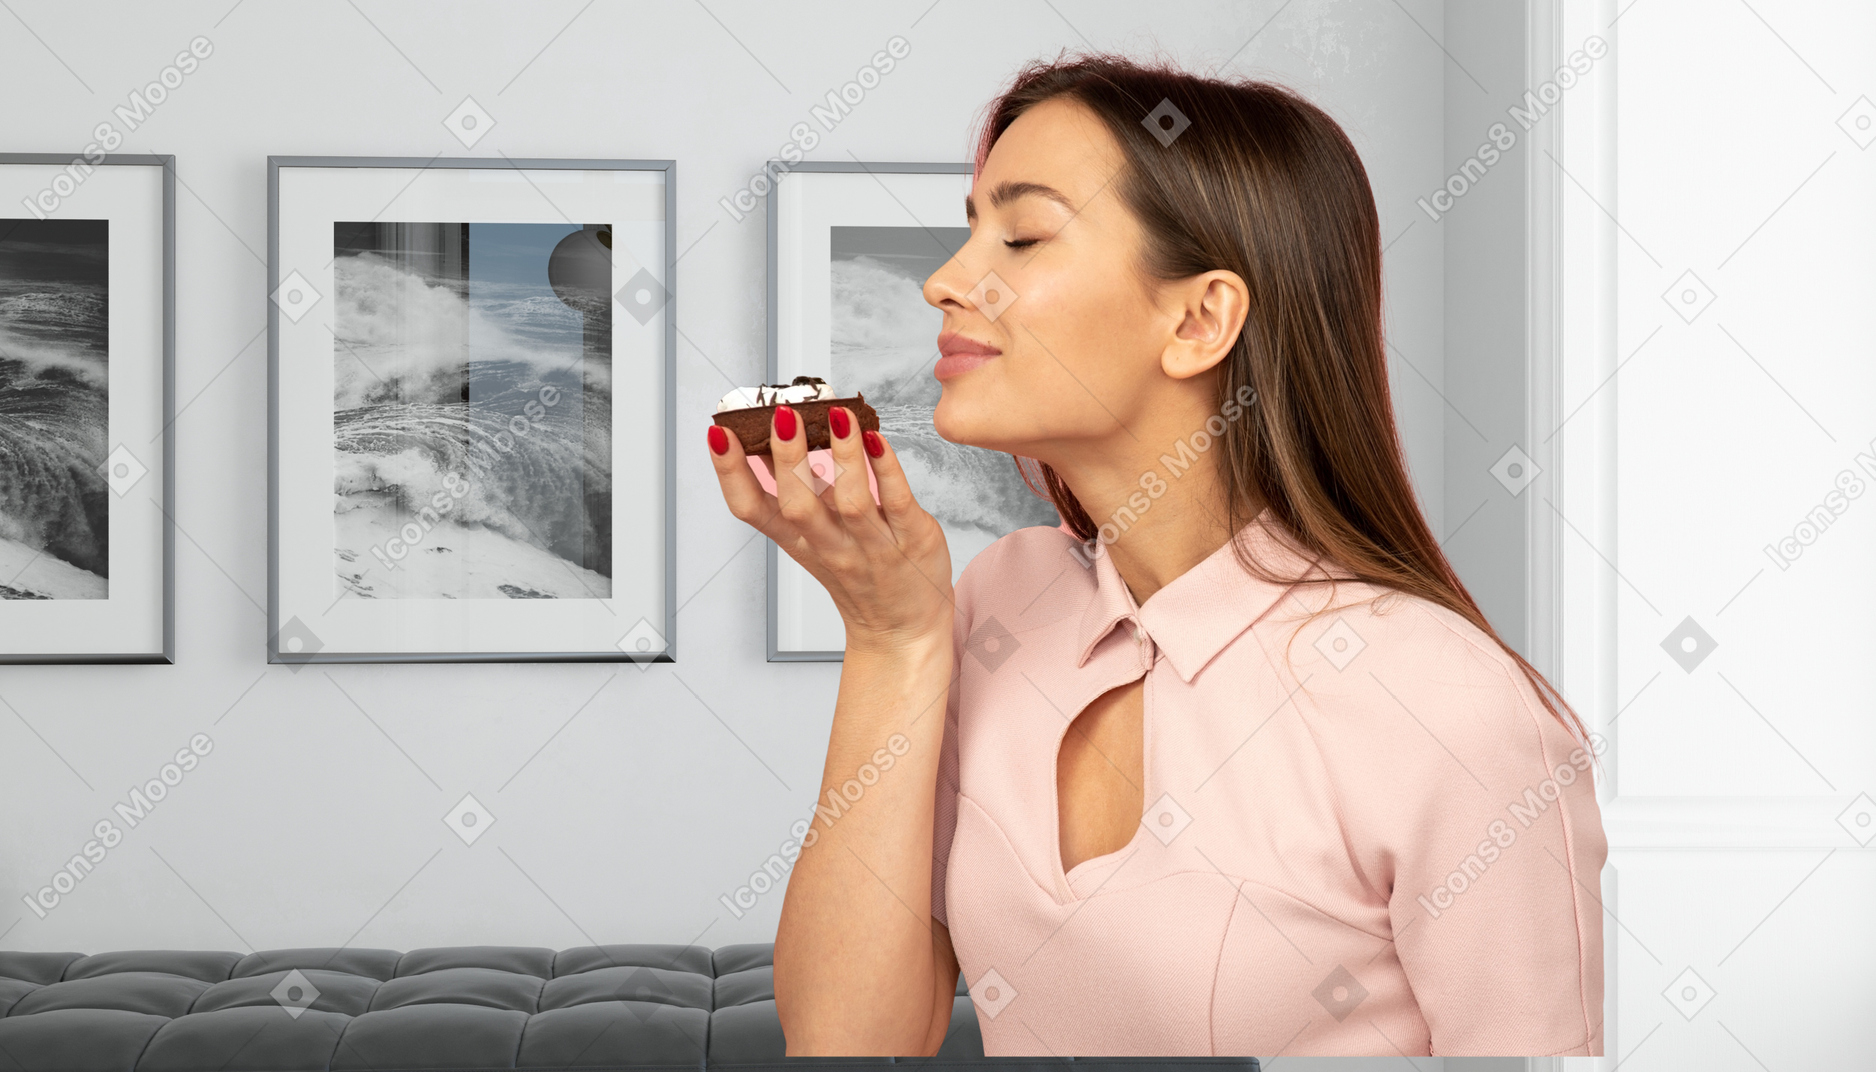 A woman smelling a piece of cake in her hand